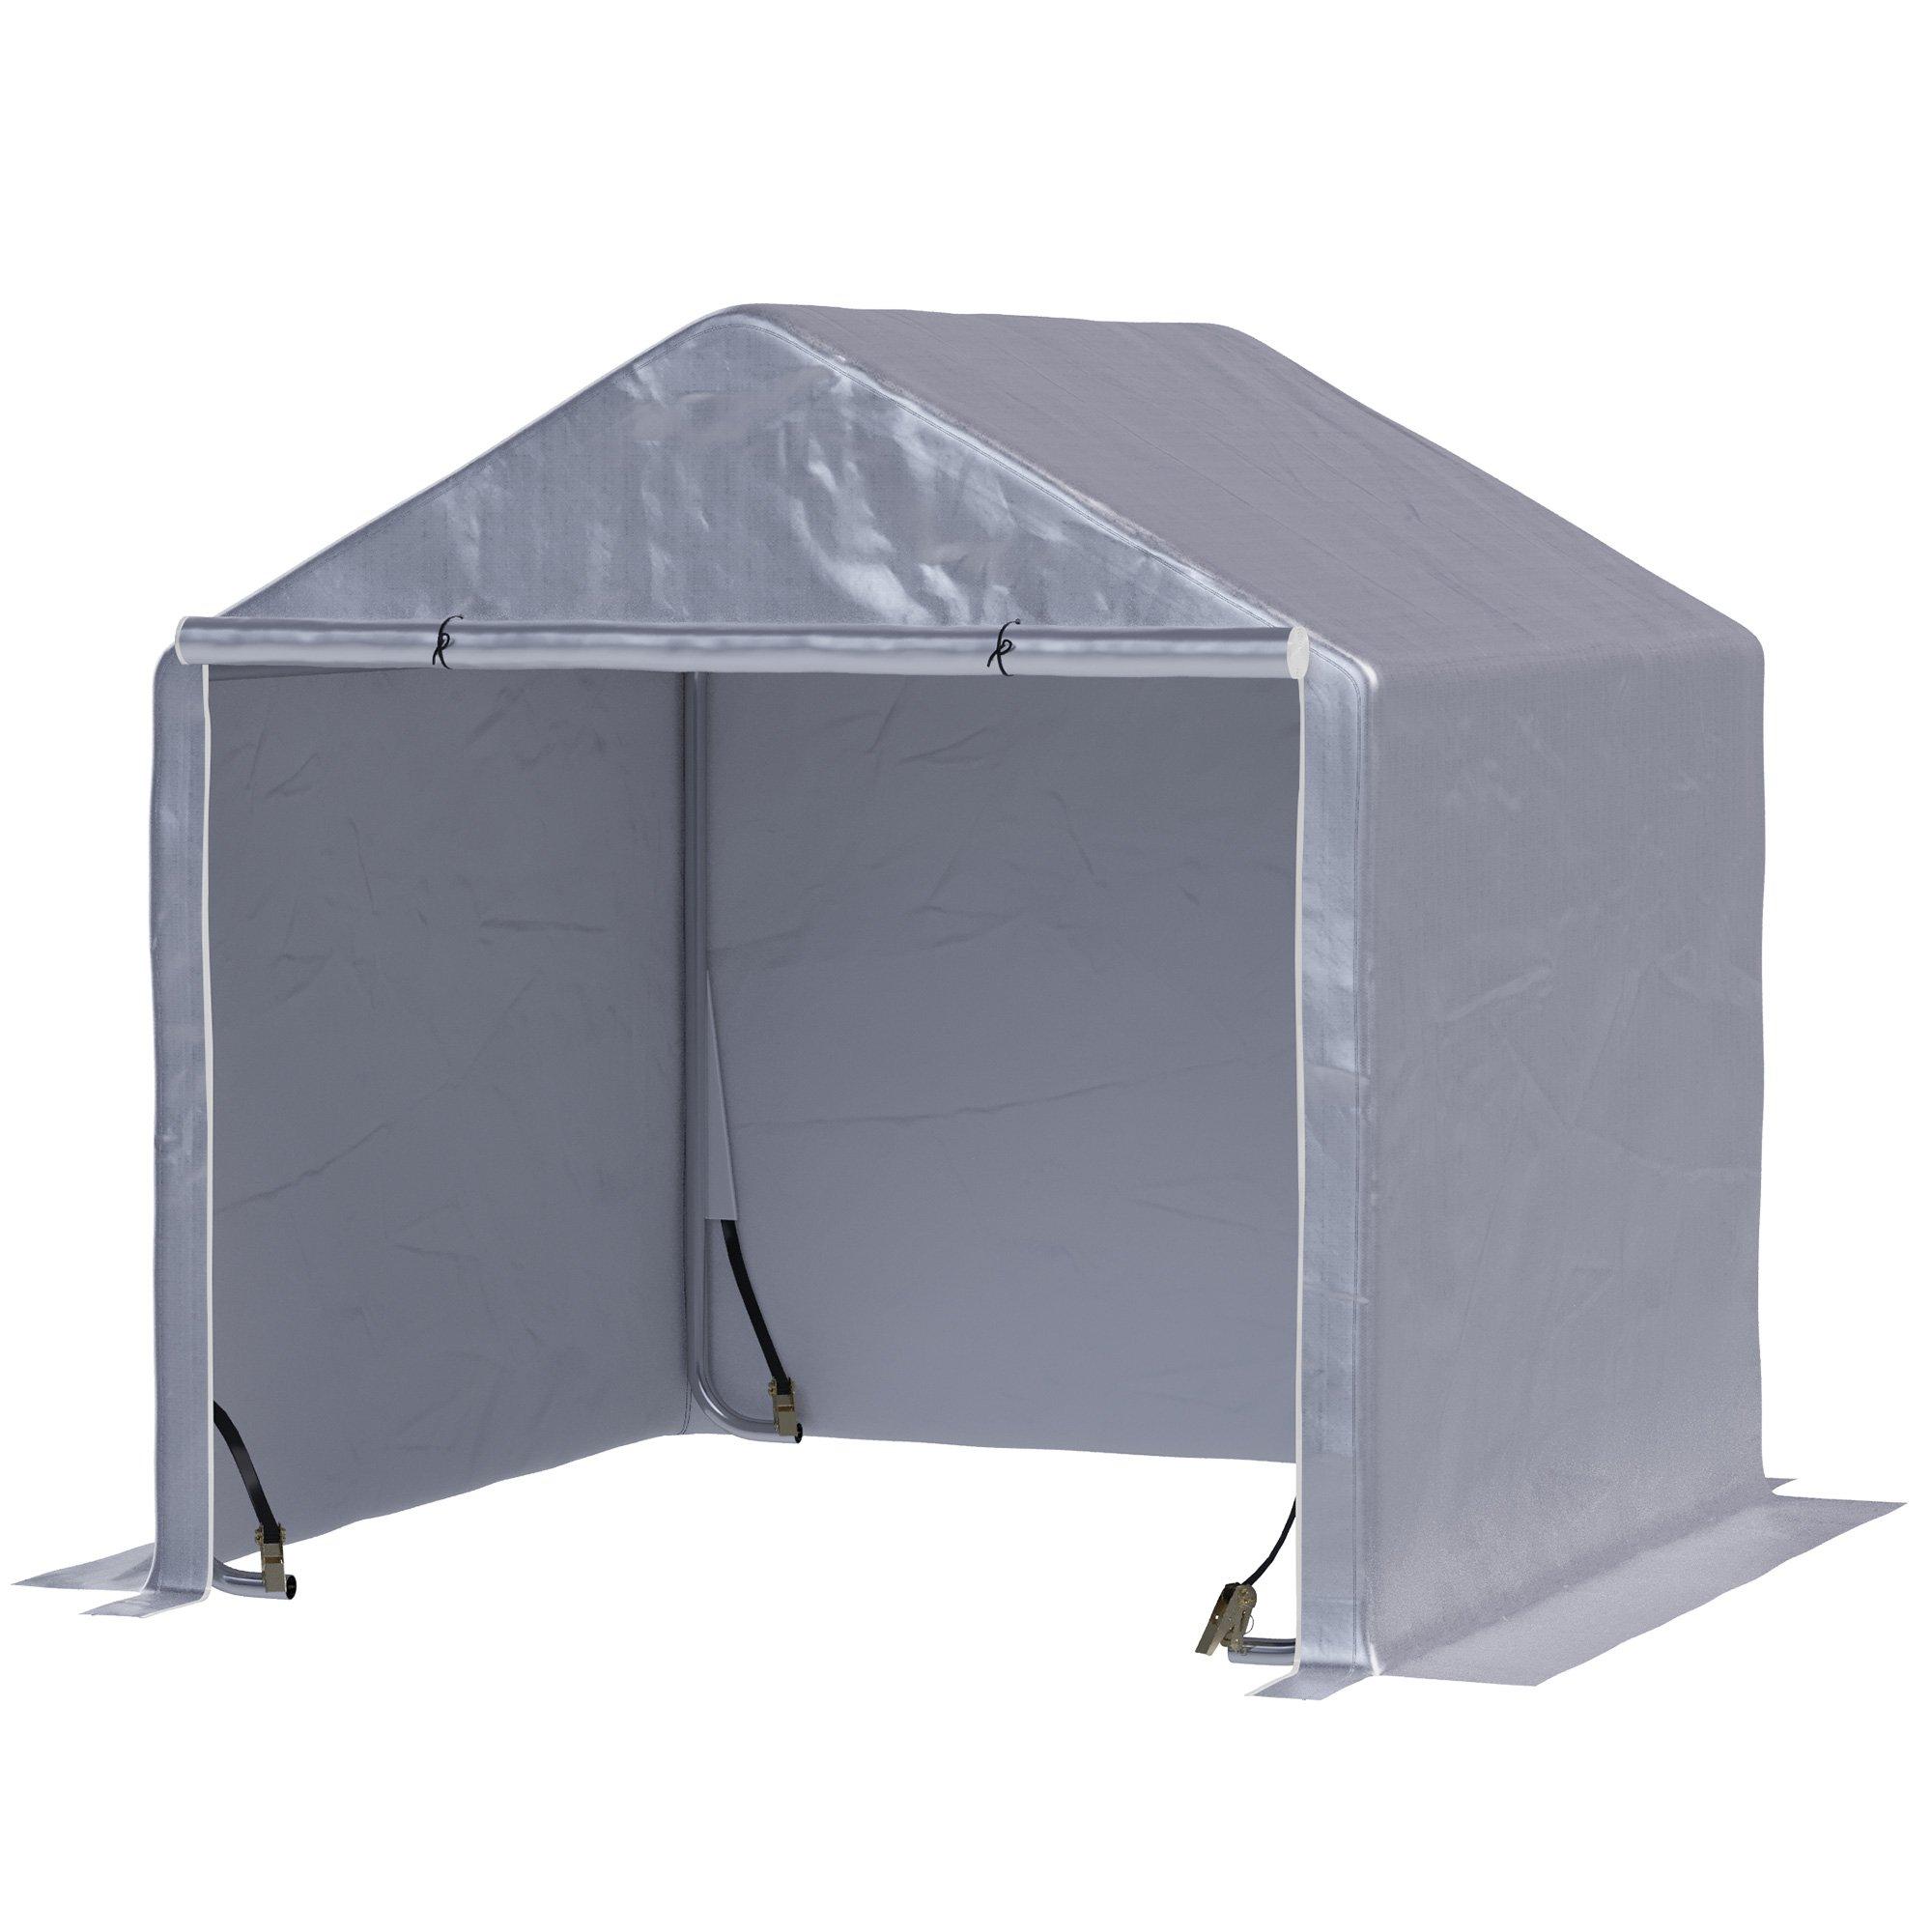 2x2m Temporary Garden Shed Storage Tent with Steel Frame